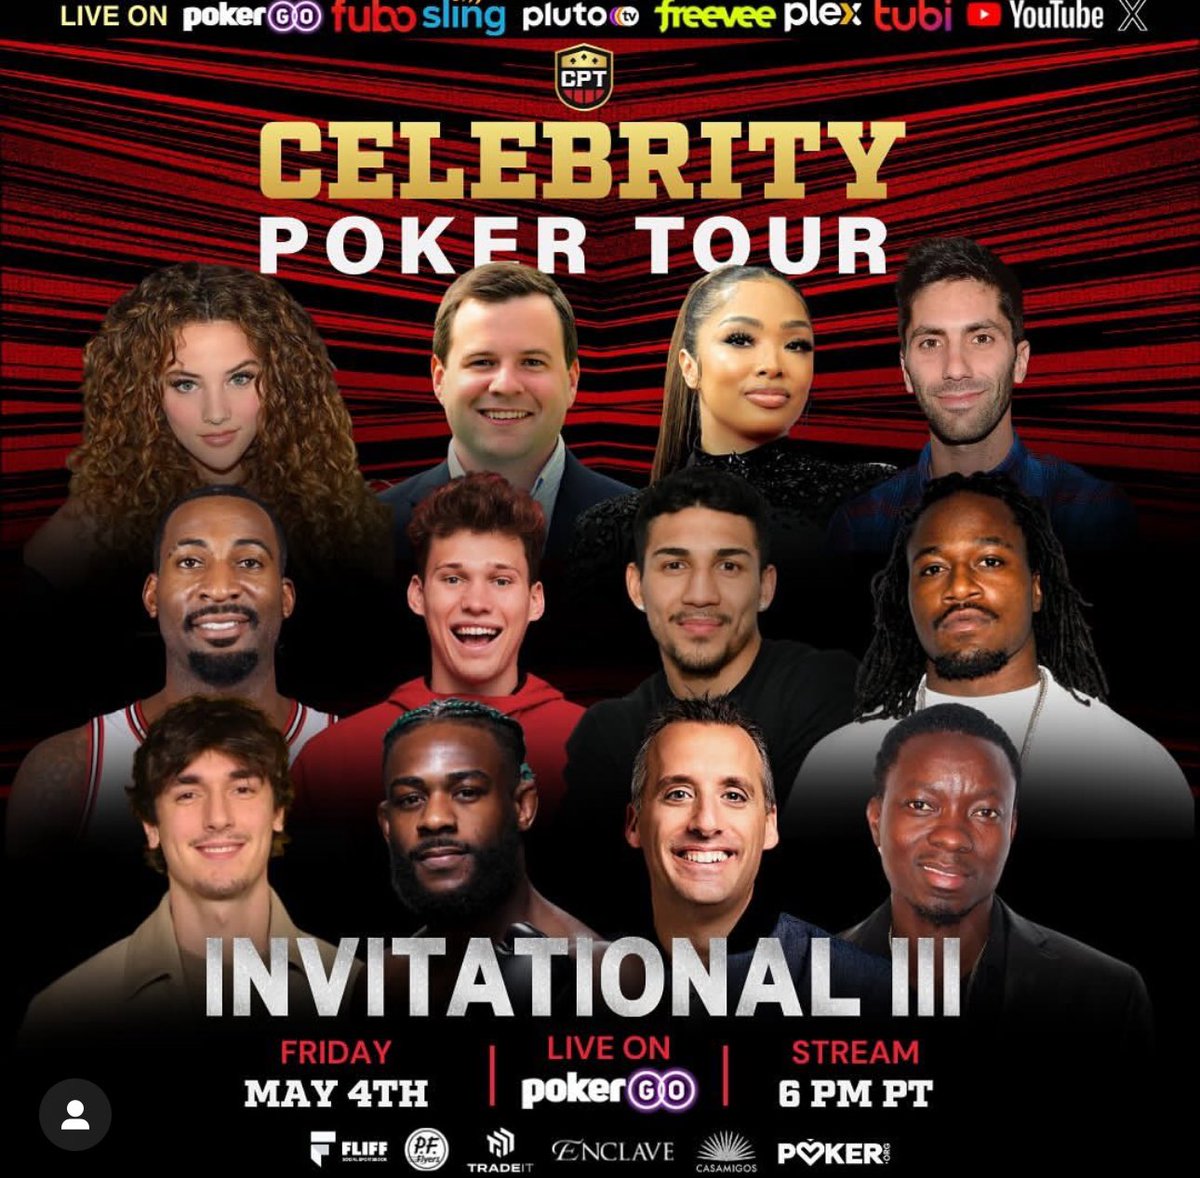 Bama fam, I’ll be playing in the @celebpokertour this weekend in Vegas. Let’s get all the coin!!! #RollTide